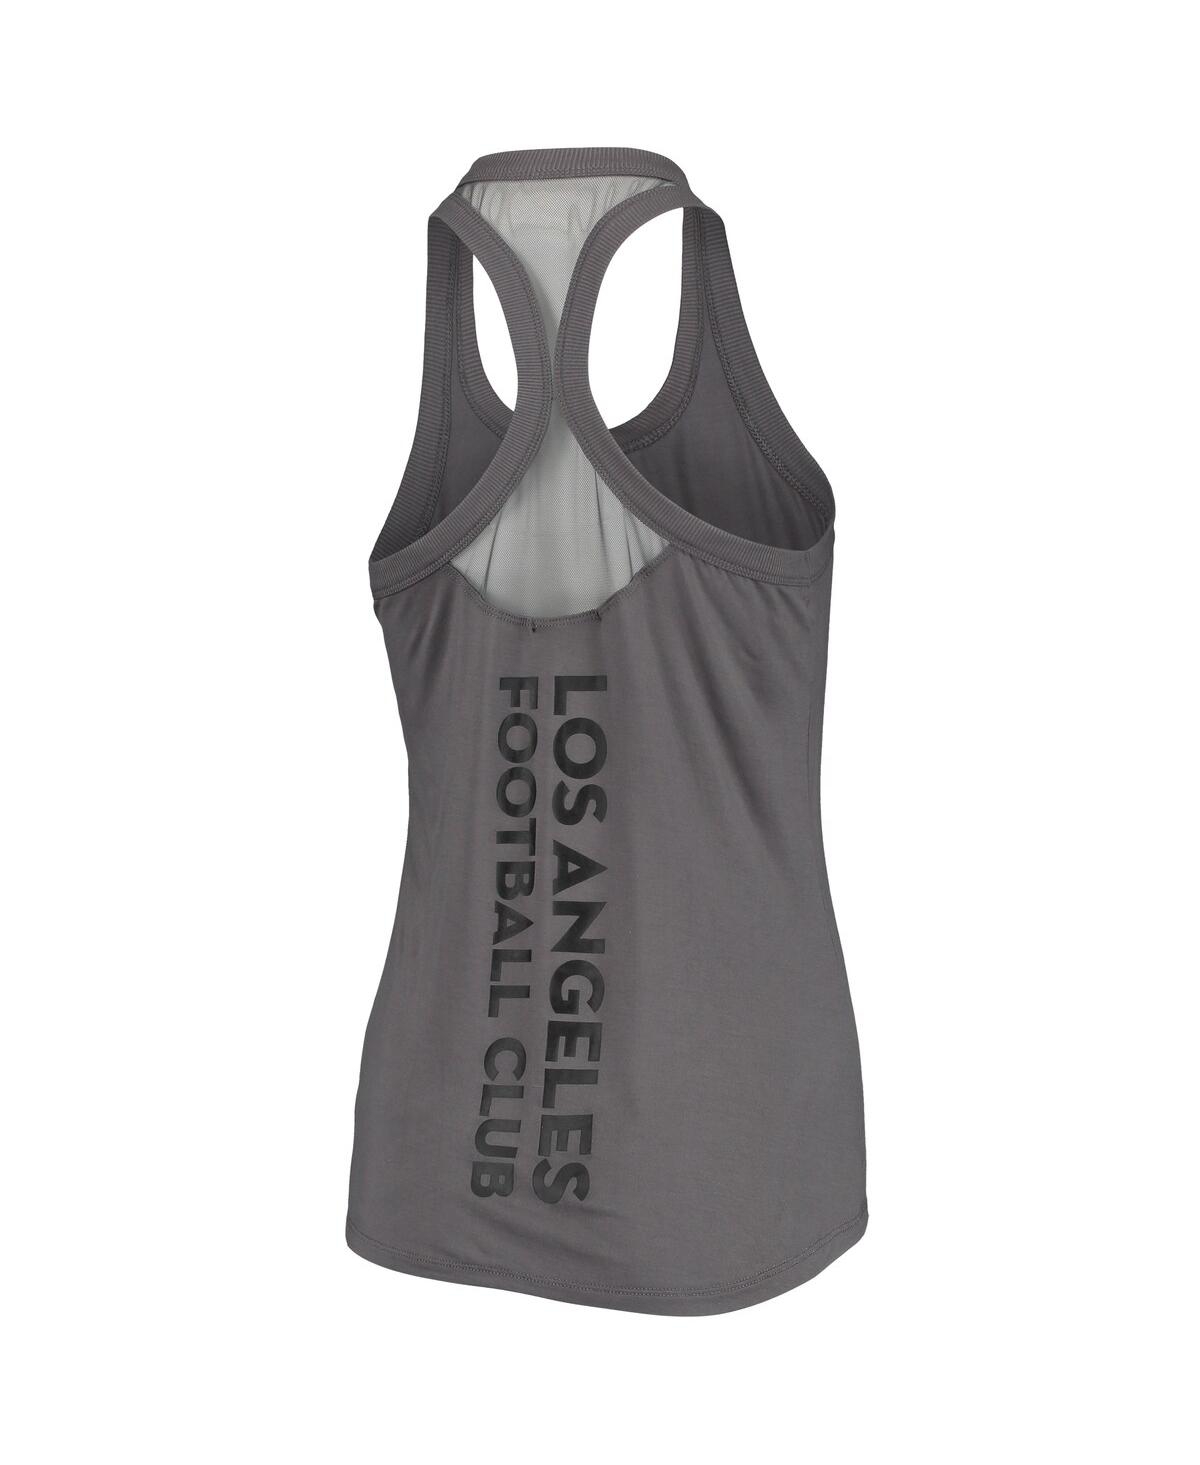 Shop The Wild Collective Women's  Gray Lafc Athleisure Tank Top